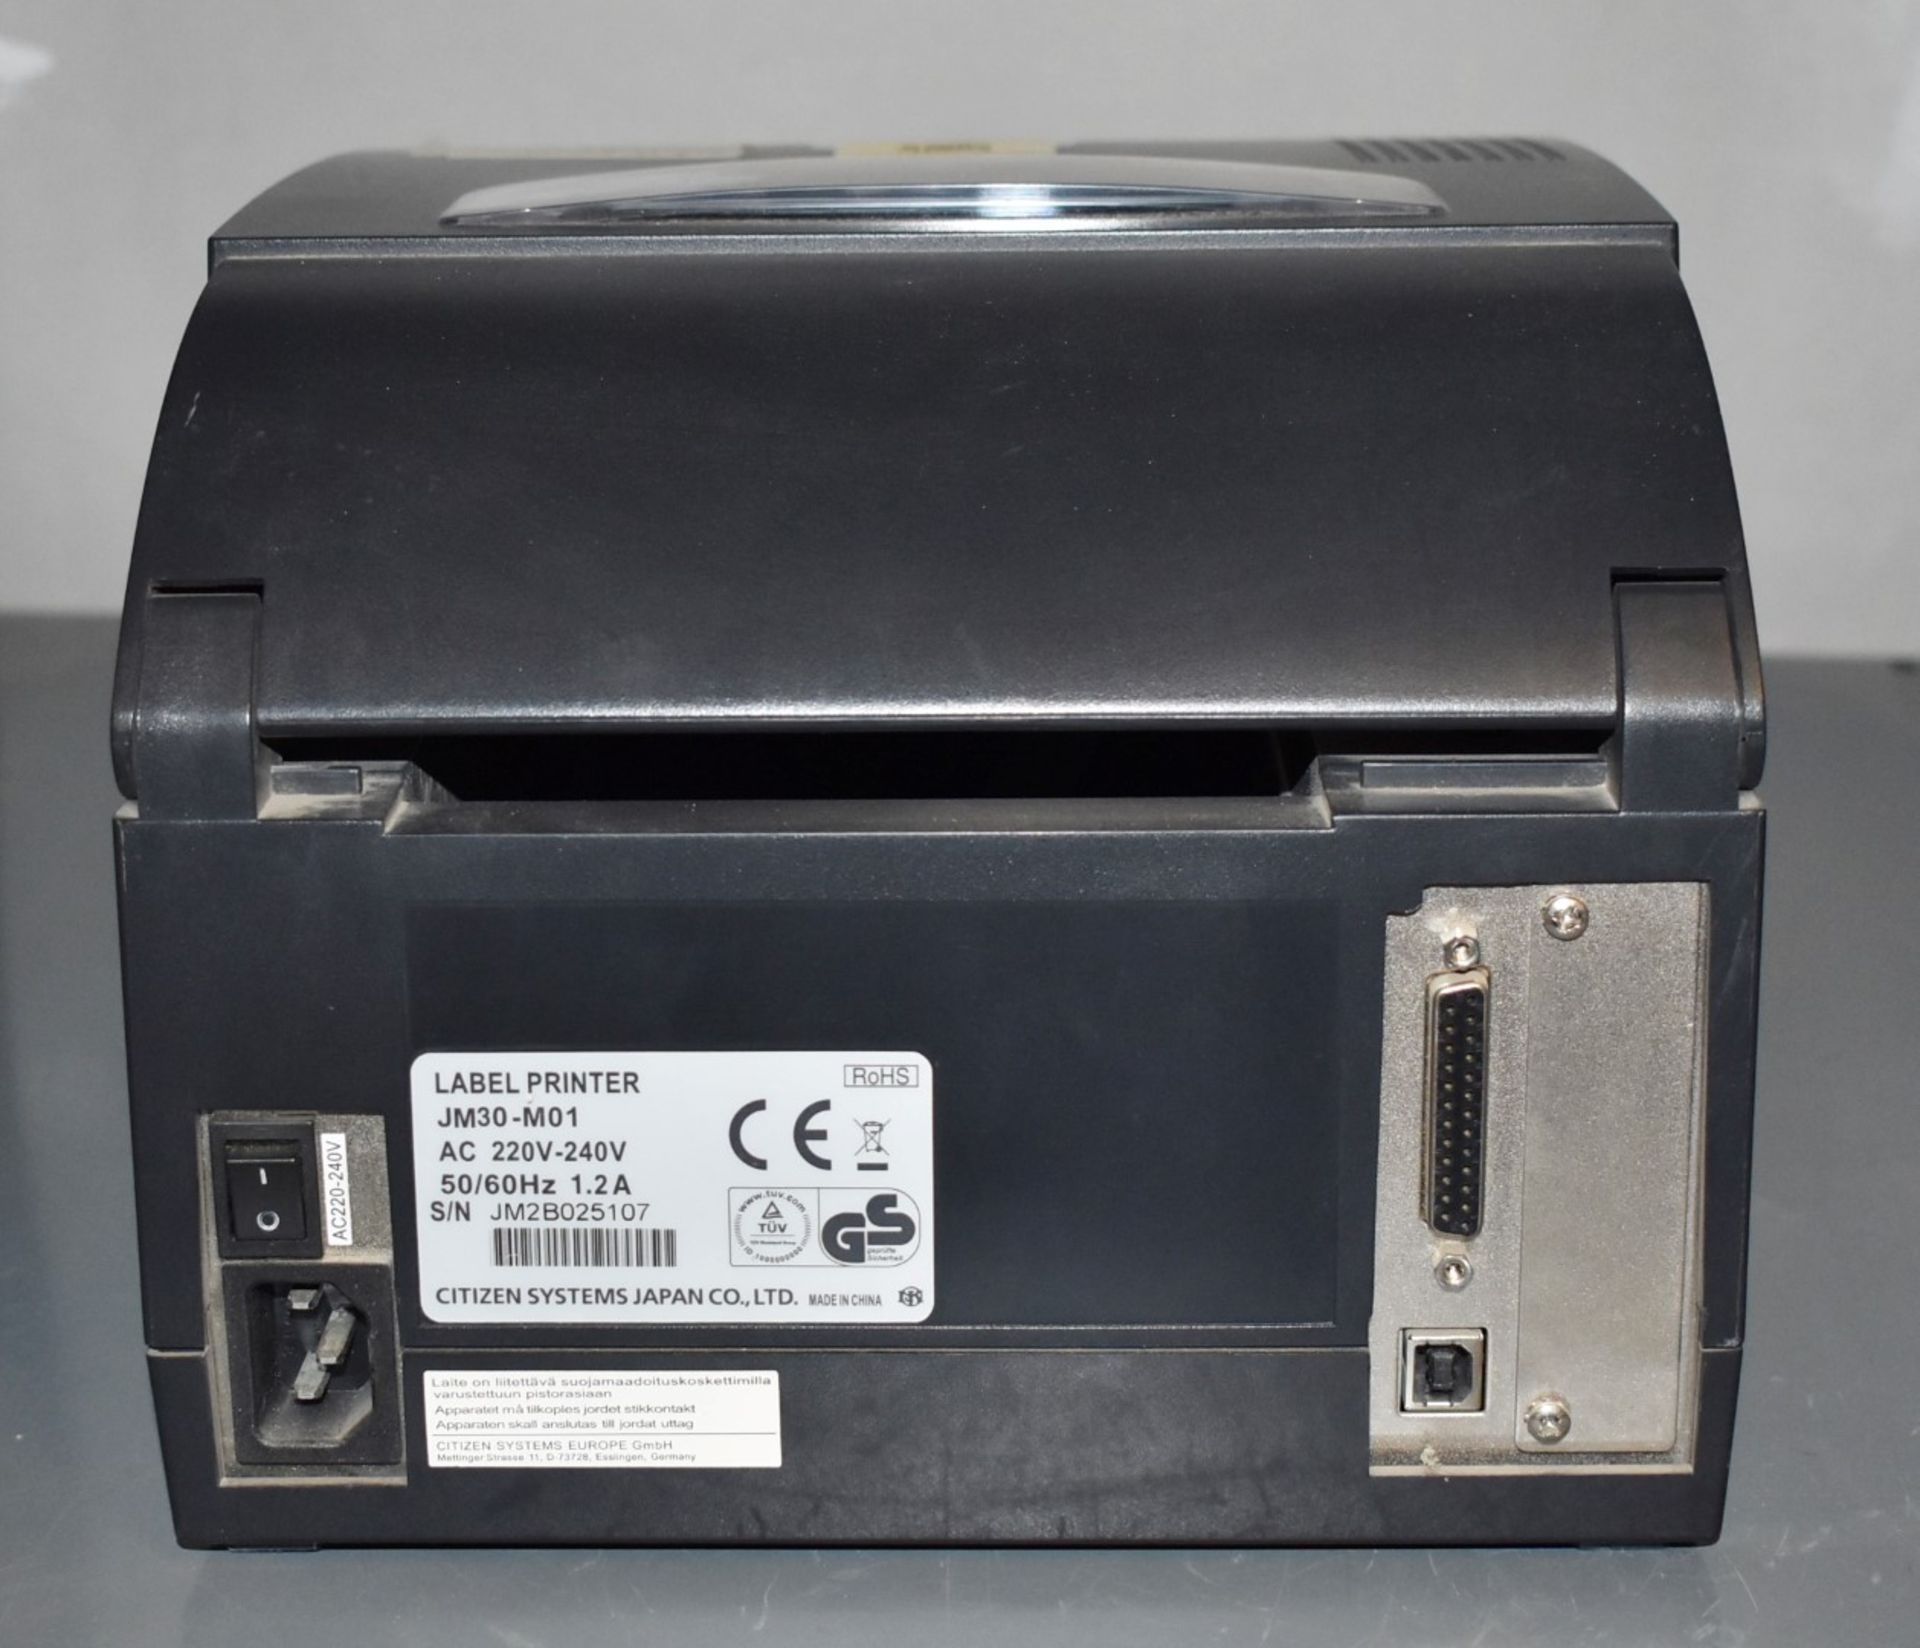 1 x Citizen CL-S521 Direct Thermal USB Label Printer - Includes One Roll of Labels, Power Lead and - Image 7 of 13